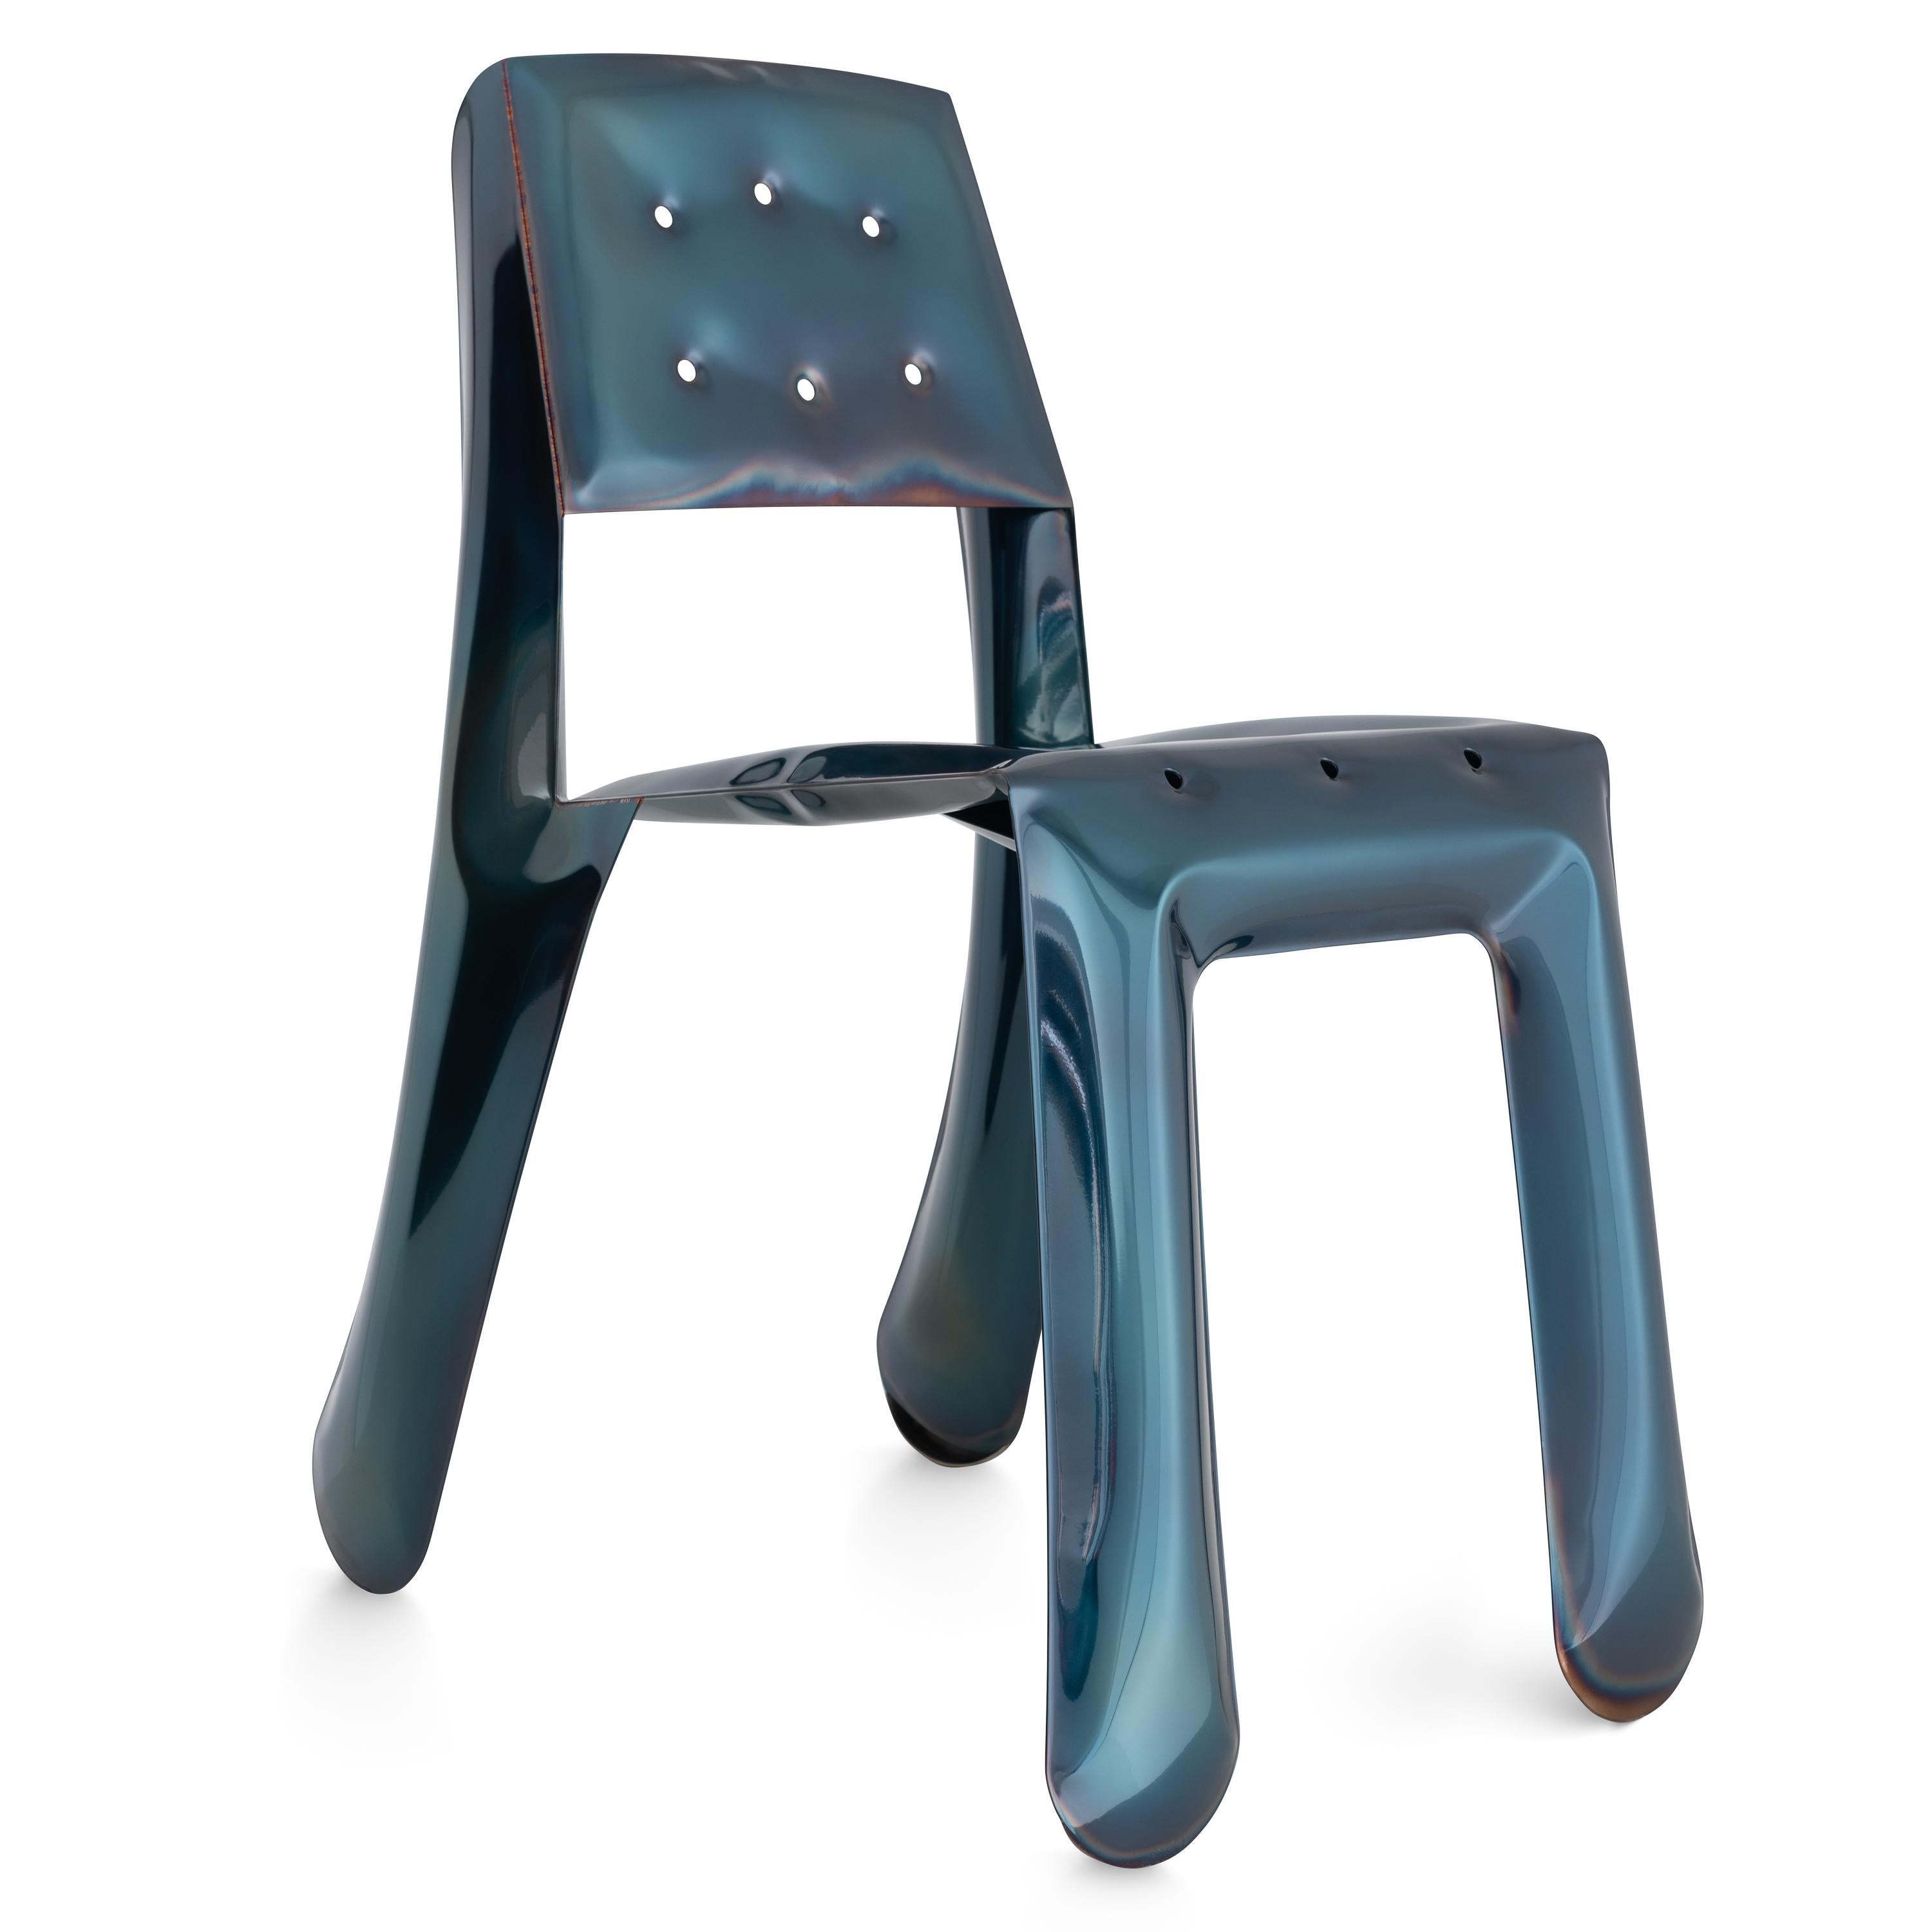 Cosmic Blue Chippensteel 0.5 Sculptural Chair by Zieta
Dimensions: D 58 x W 46 x H 80 cm 
Material: stainless steel, carbon steel. 
Finish: thermal colored in Cosmic Blue. 
Available in colors: flamed gold and cosmic blue. Also available in